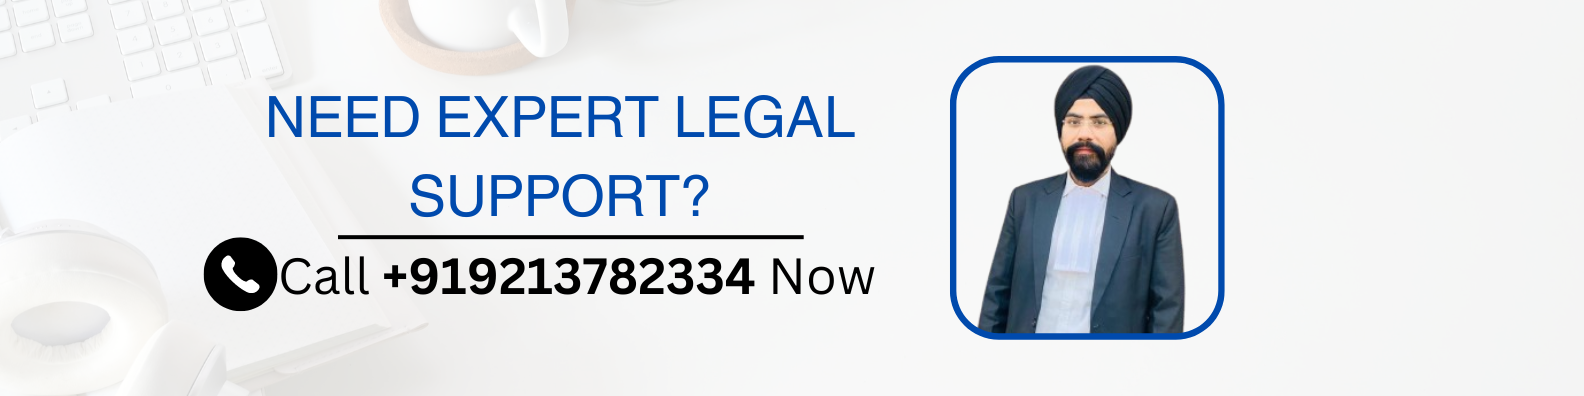 call +919213782334 GS Bagga Now for legal support